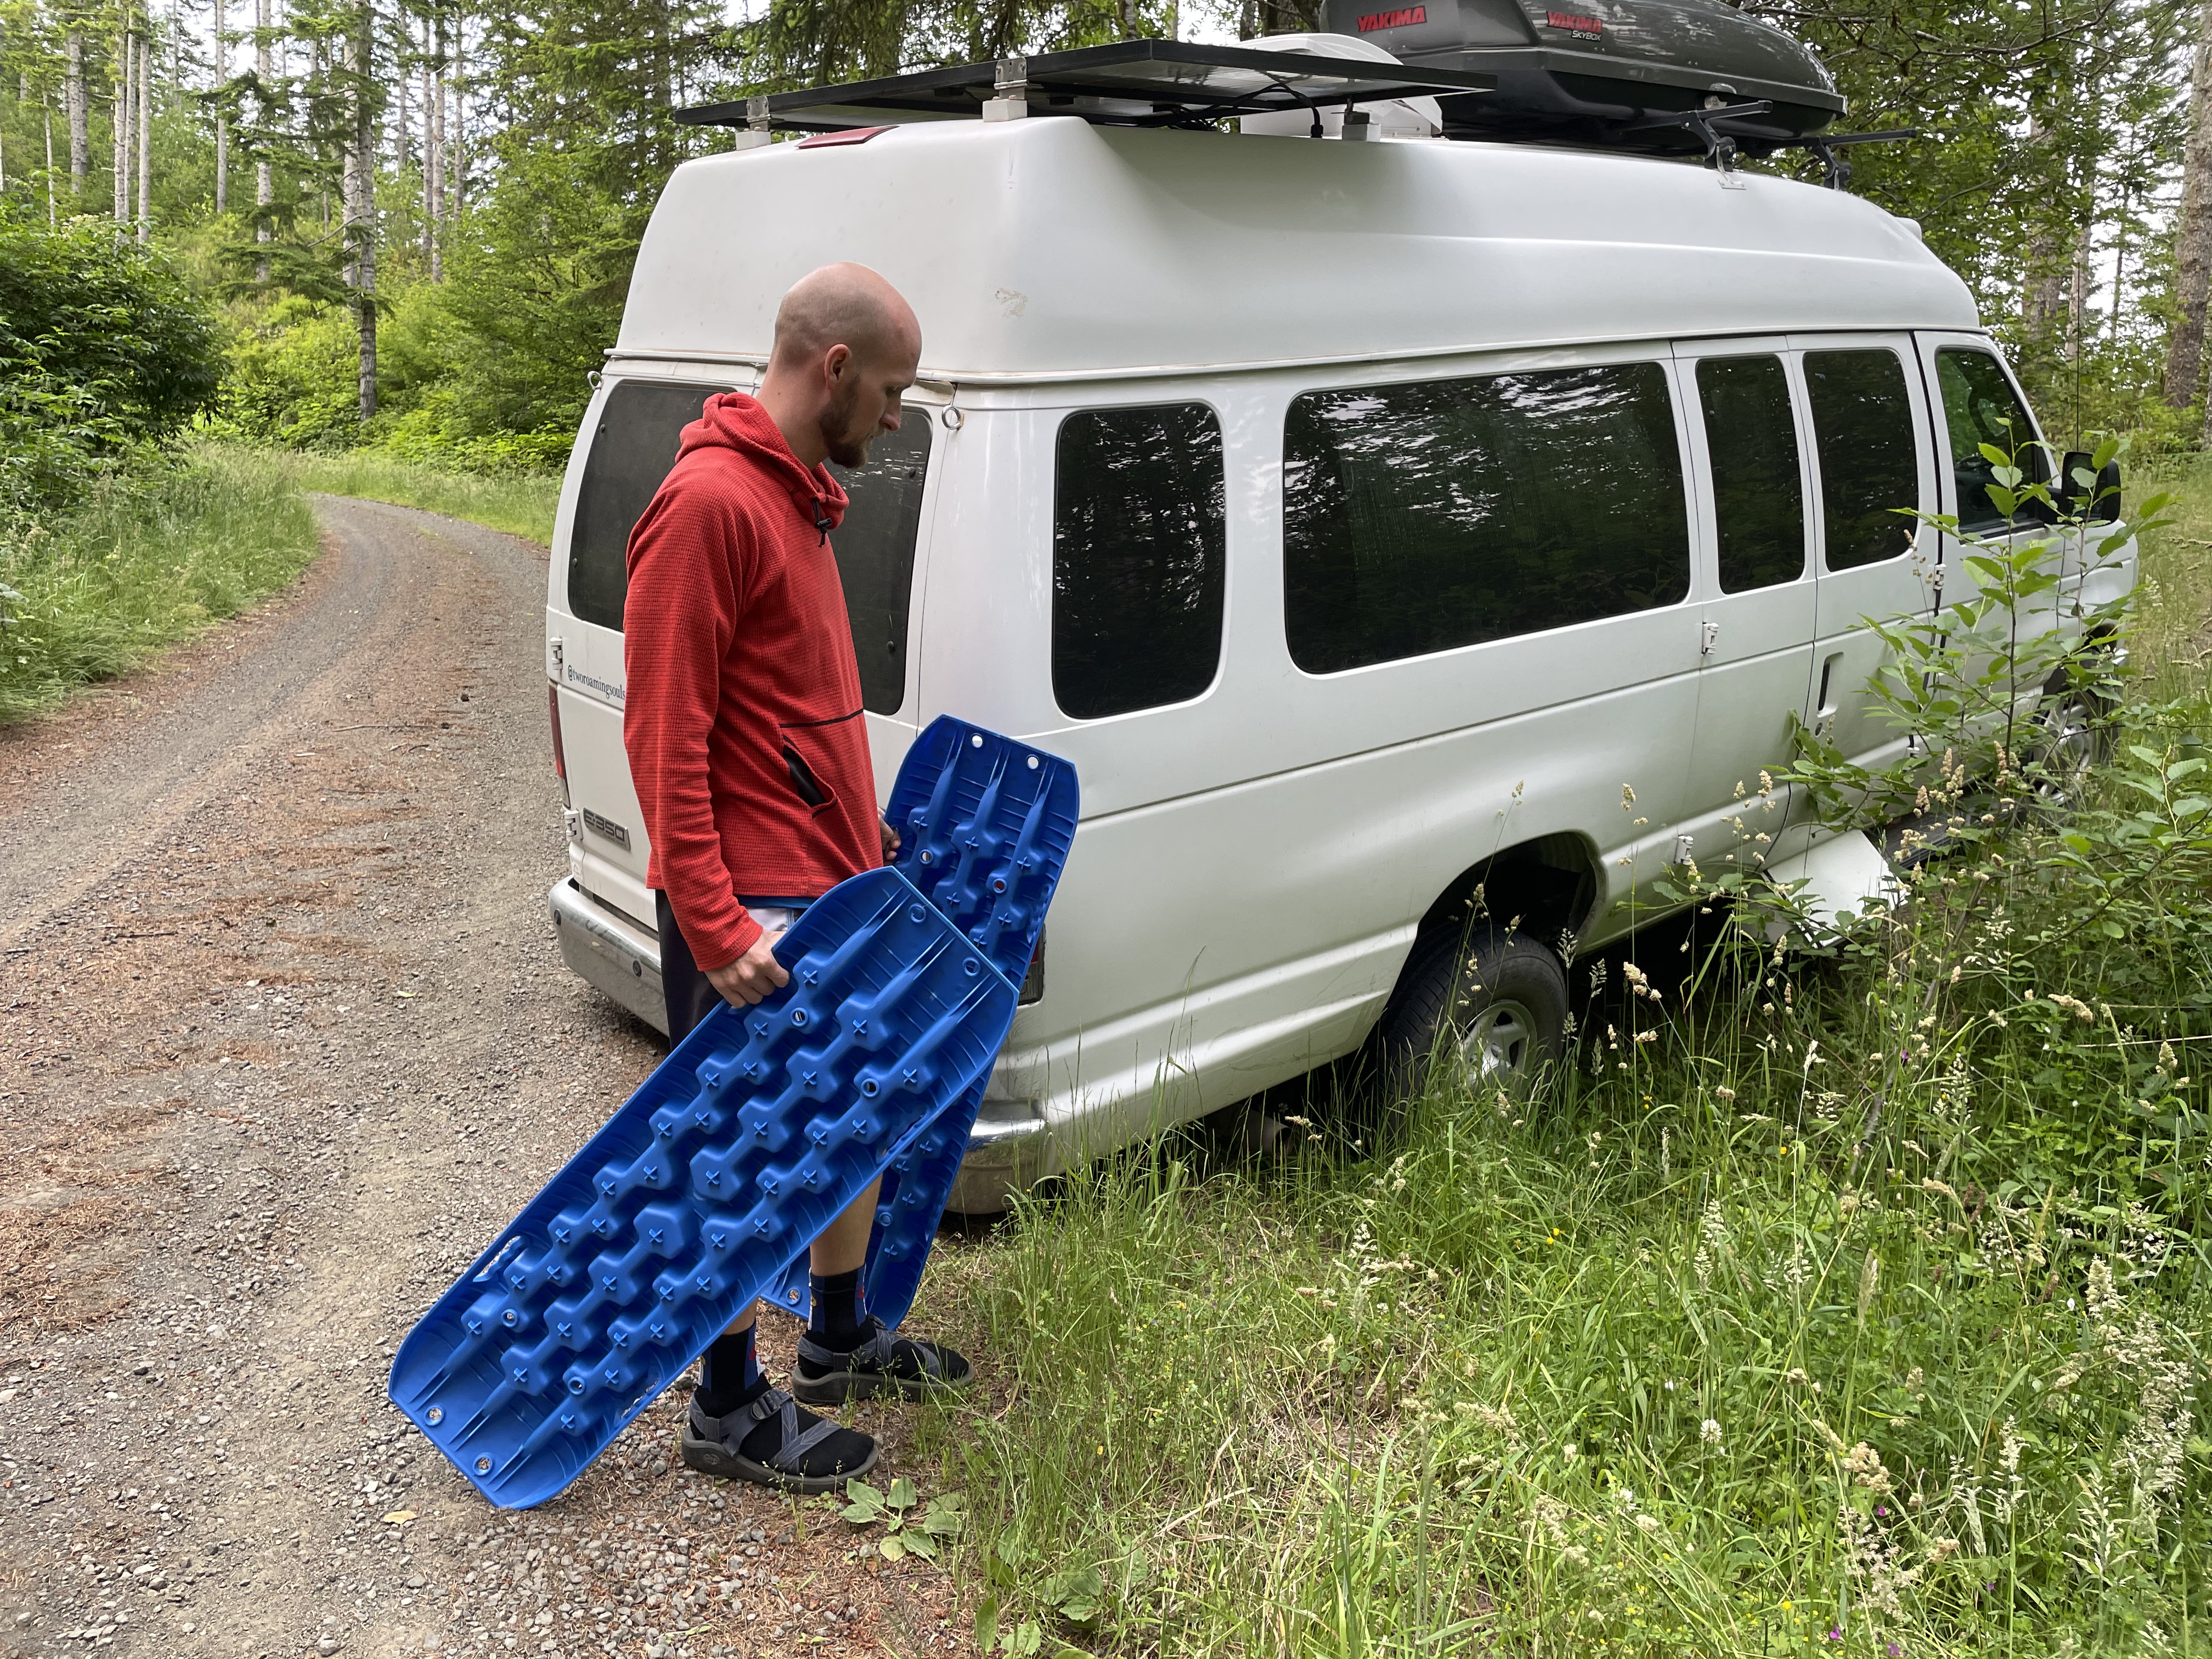 A campervan stuck off-roading is going to be saved with traction boards.